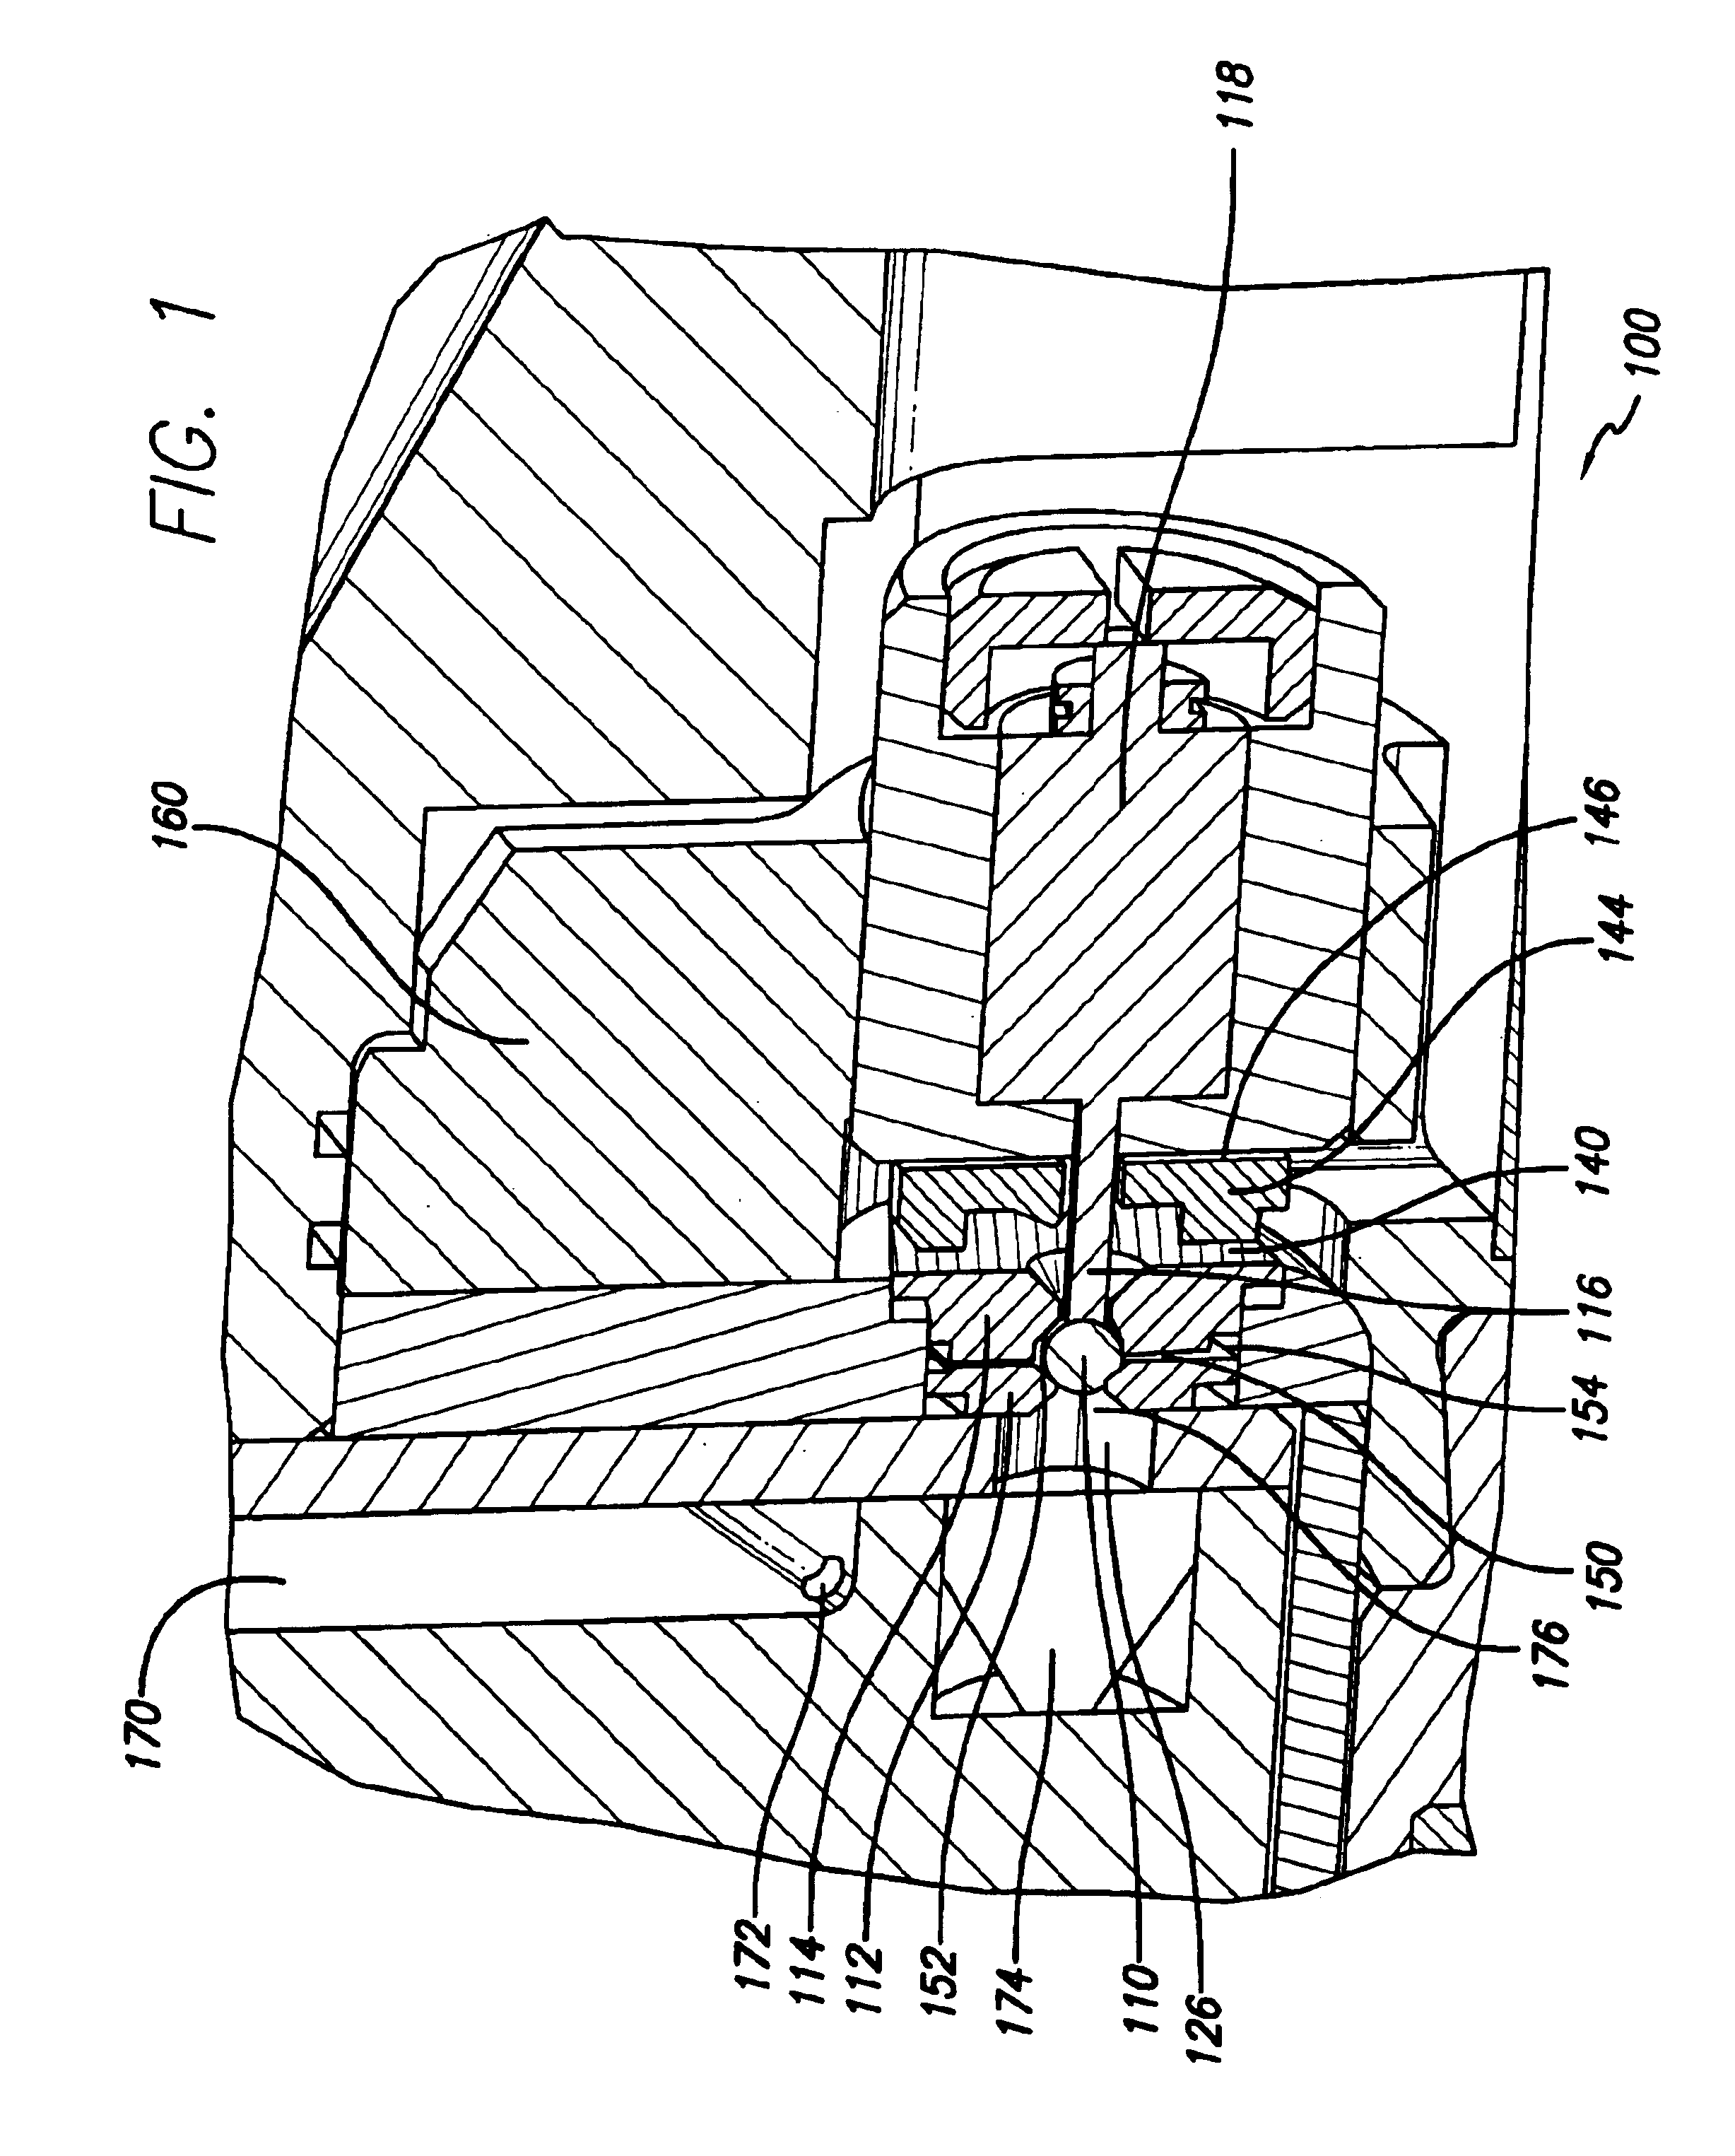 Vehicle, lightweight pneumatic pilot valve and related systems therefor